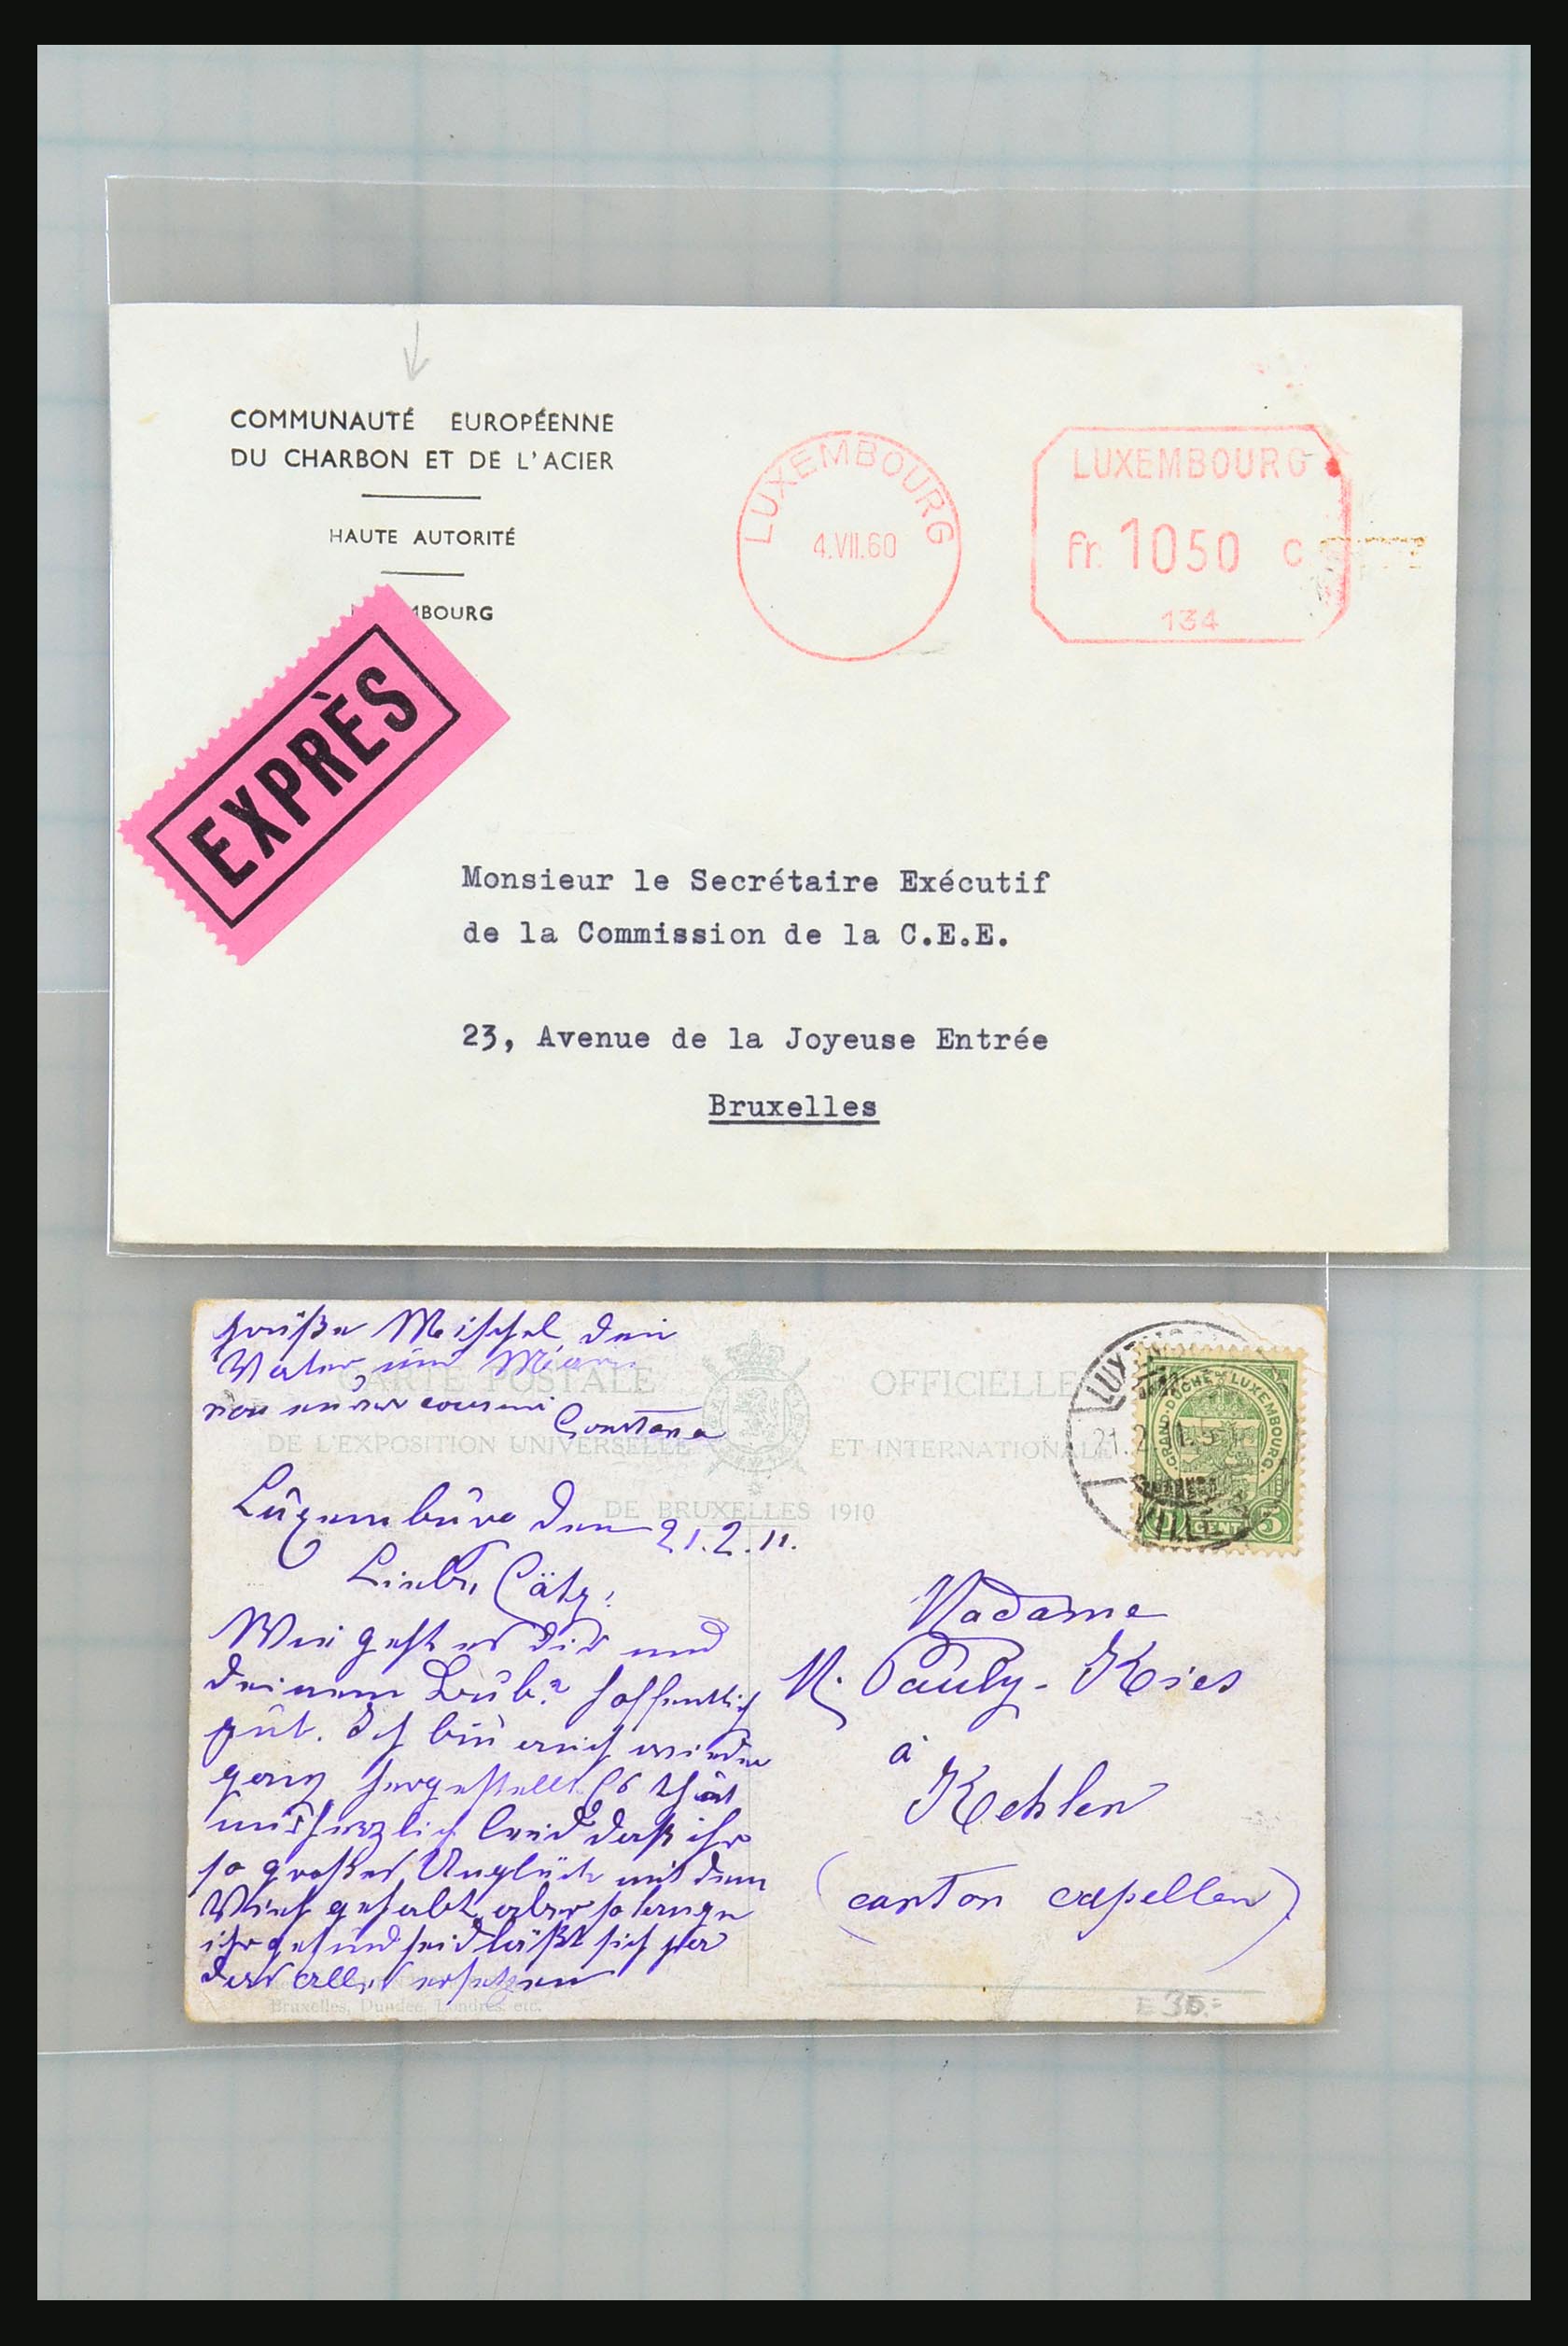 31358 007 - 31358 Portugal/Luxemburg/Greece covers 1880-1960.